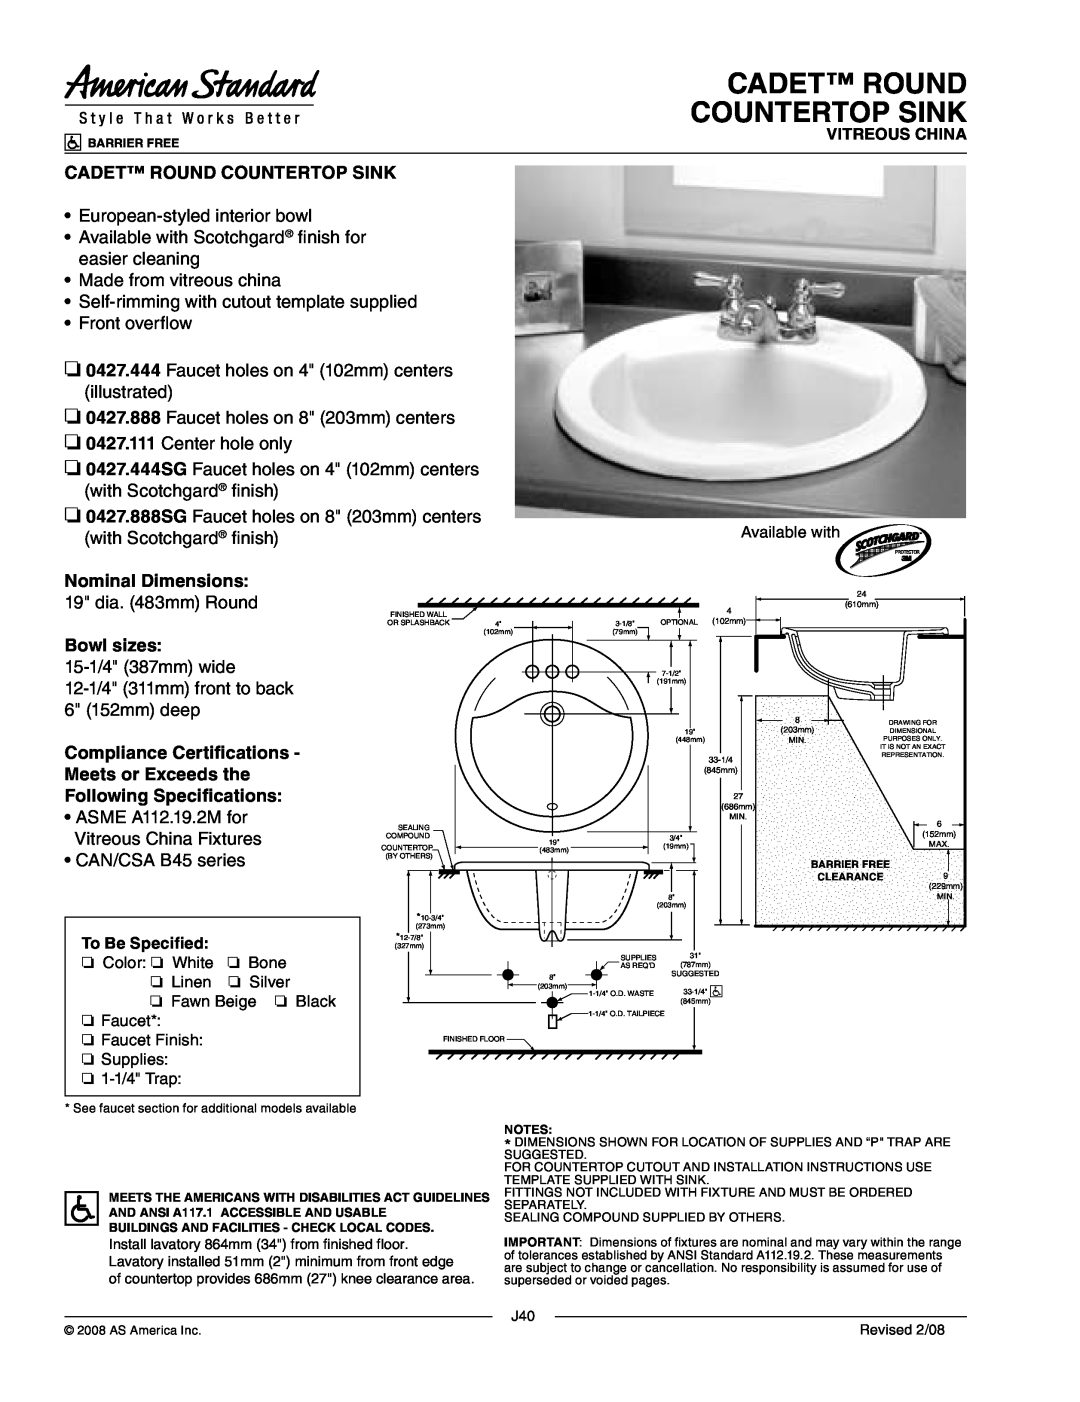 American Standard 0427.444 dimensions Cadet Round Countertop Sink, Nominal Dimensions, Bowl sizes 